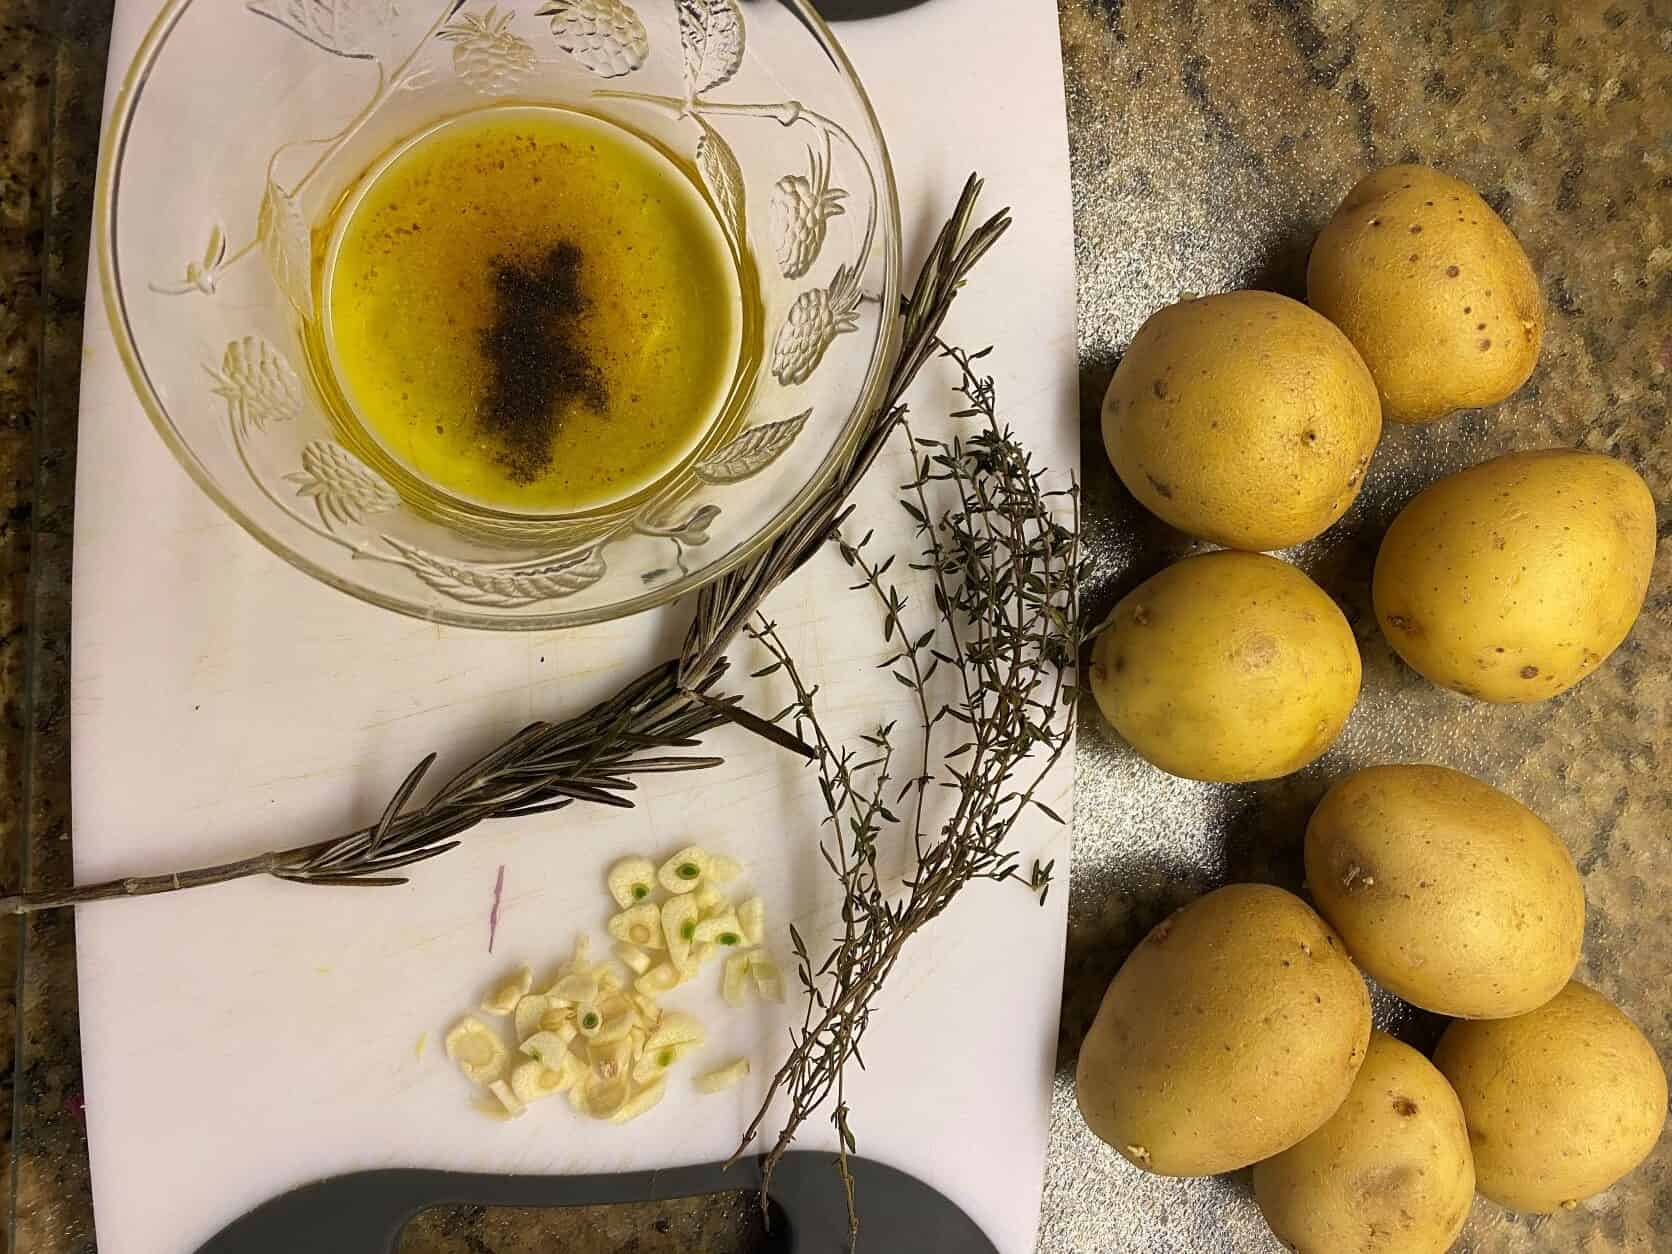 olive oil, salt peper in a dish, herbs on a cutting board and potatoes